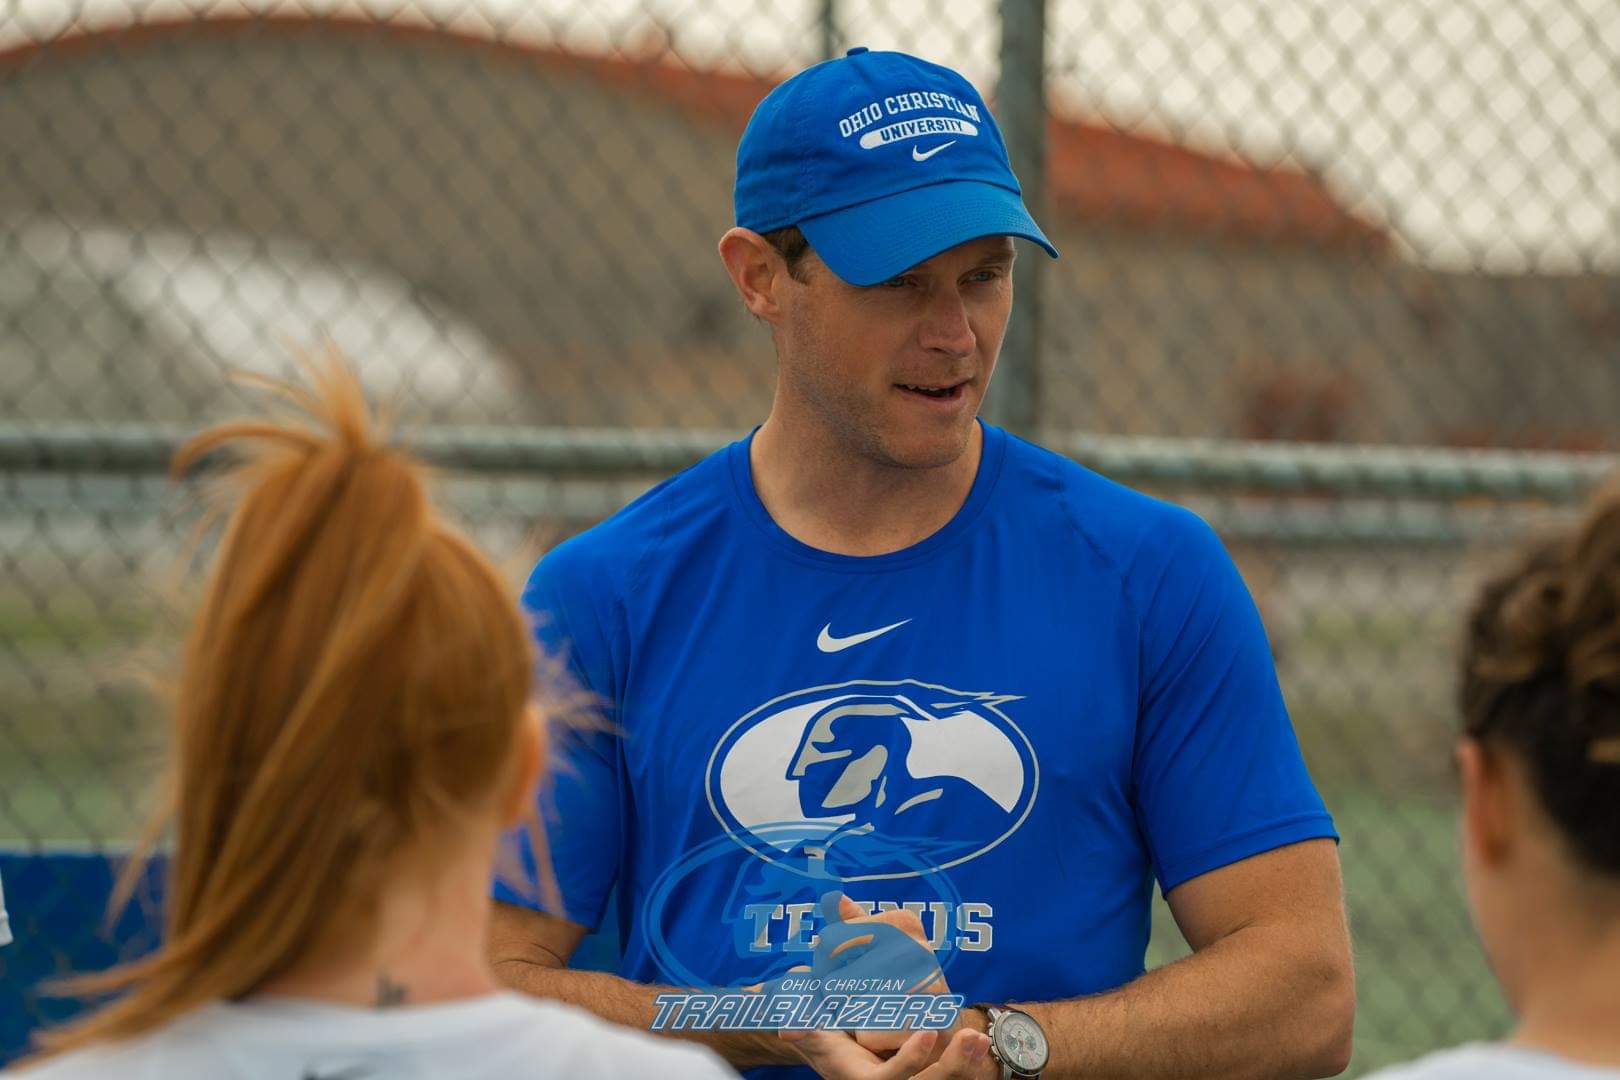 Brent M. teaches tennis lessons in Westfield, IN